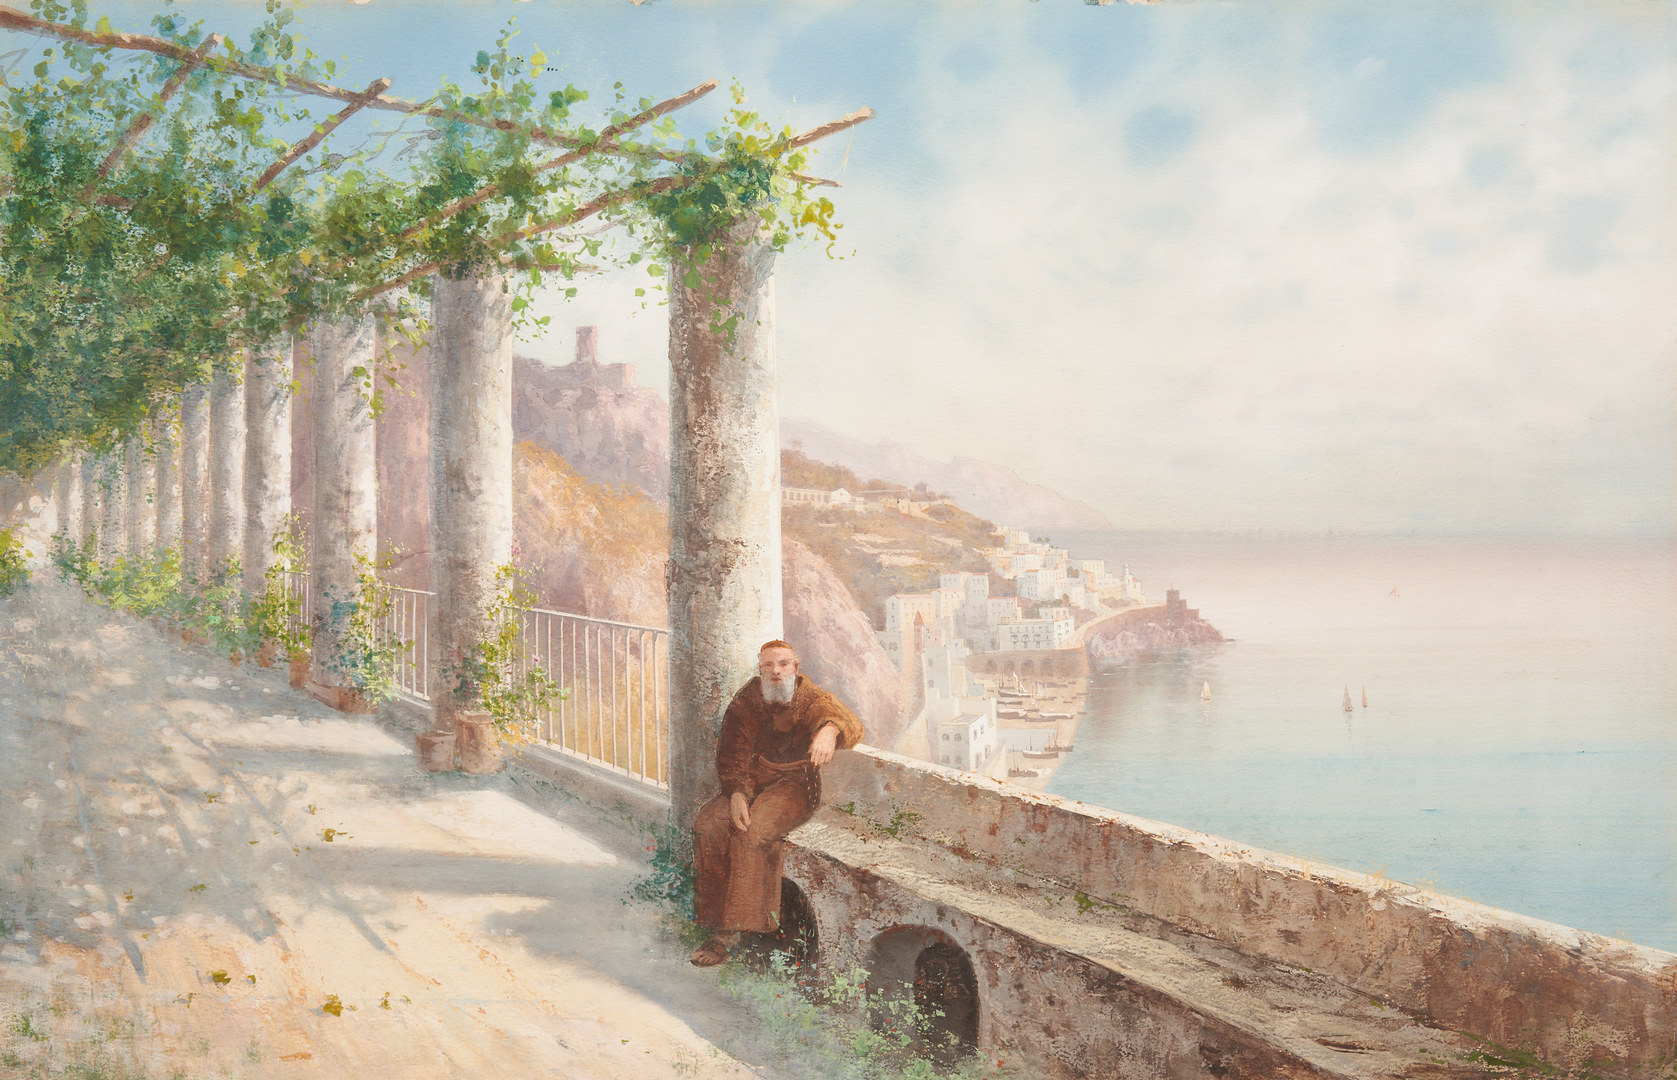 Lot 347: 6 Grand Tour Paintings of Italian Scenes, incl. Attr. to Giuseppe Corelli